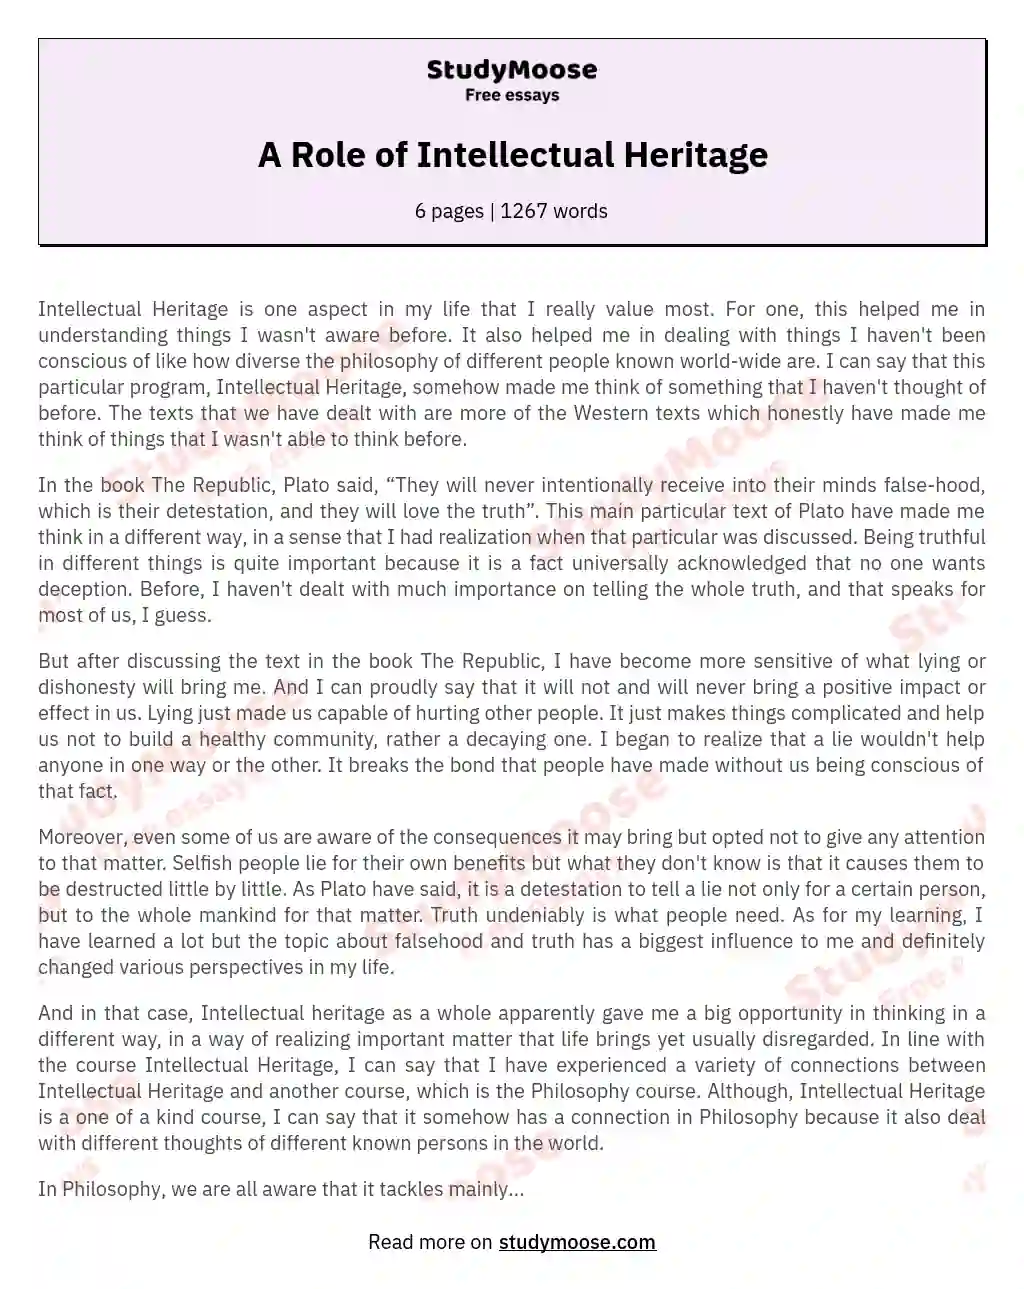 A Role of Intellectual Heritage essay